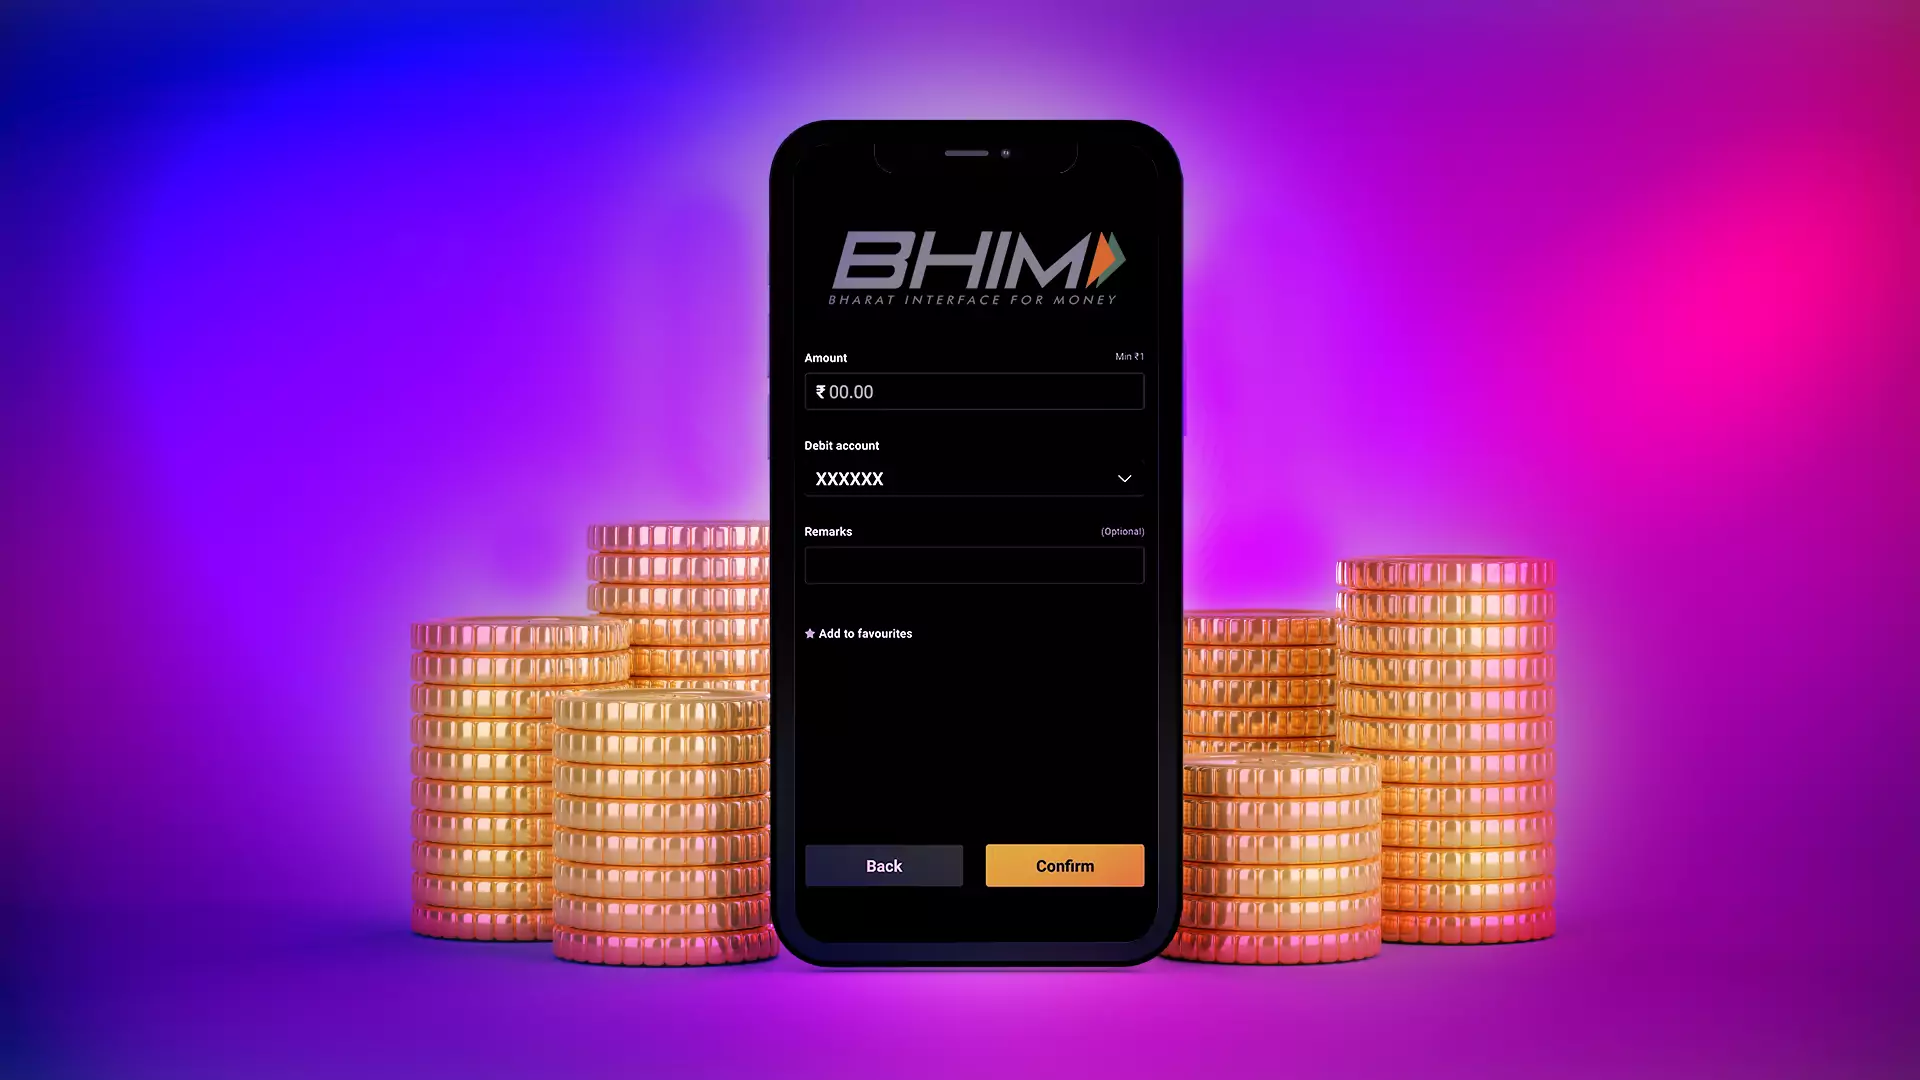 If you have the BHIM UPI app on your smartphone, it'd be perfect to use this payment method for withdrawals.